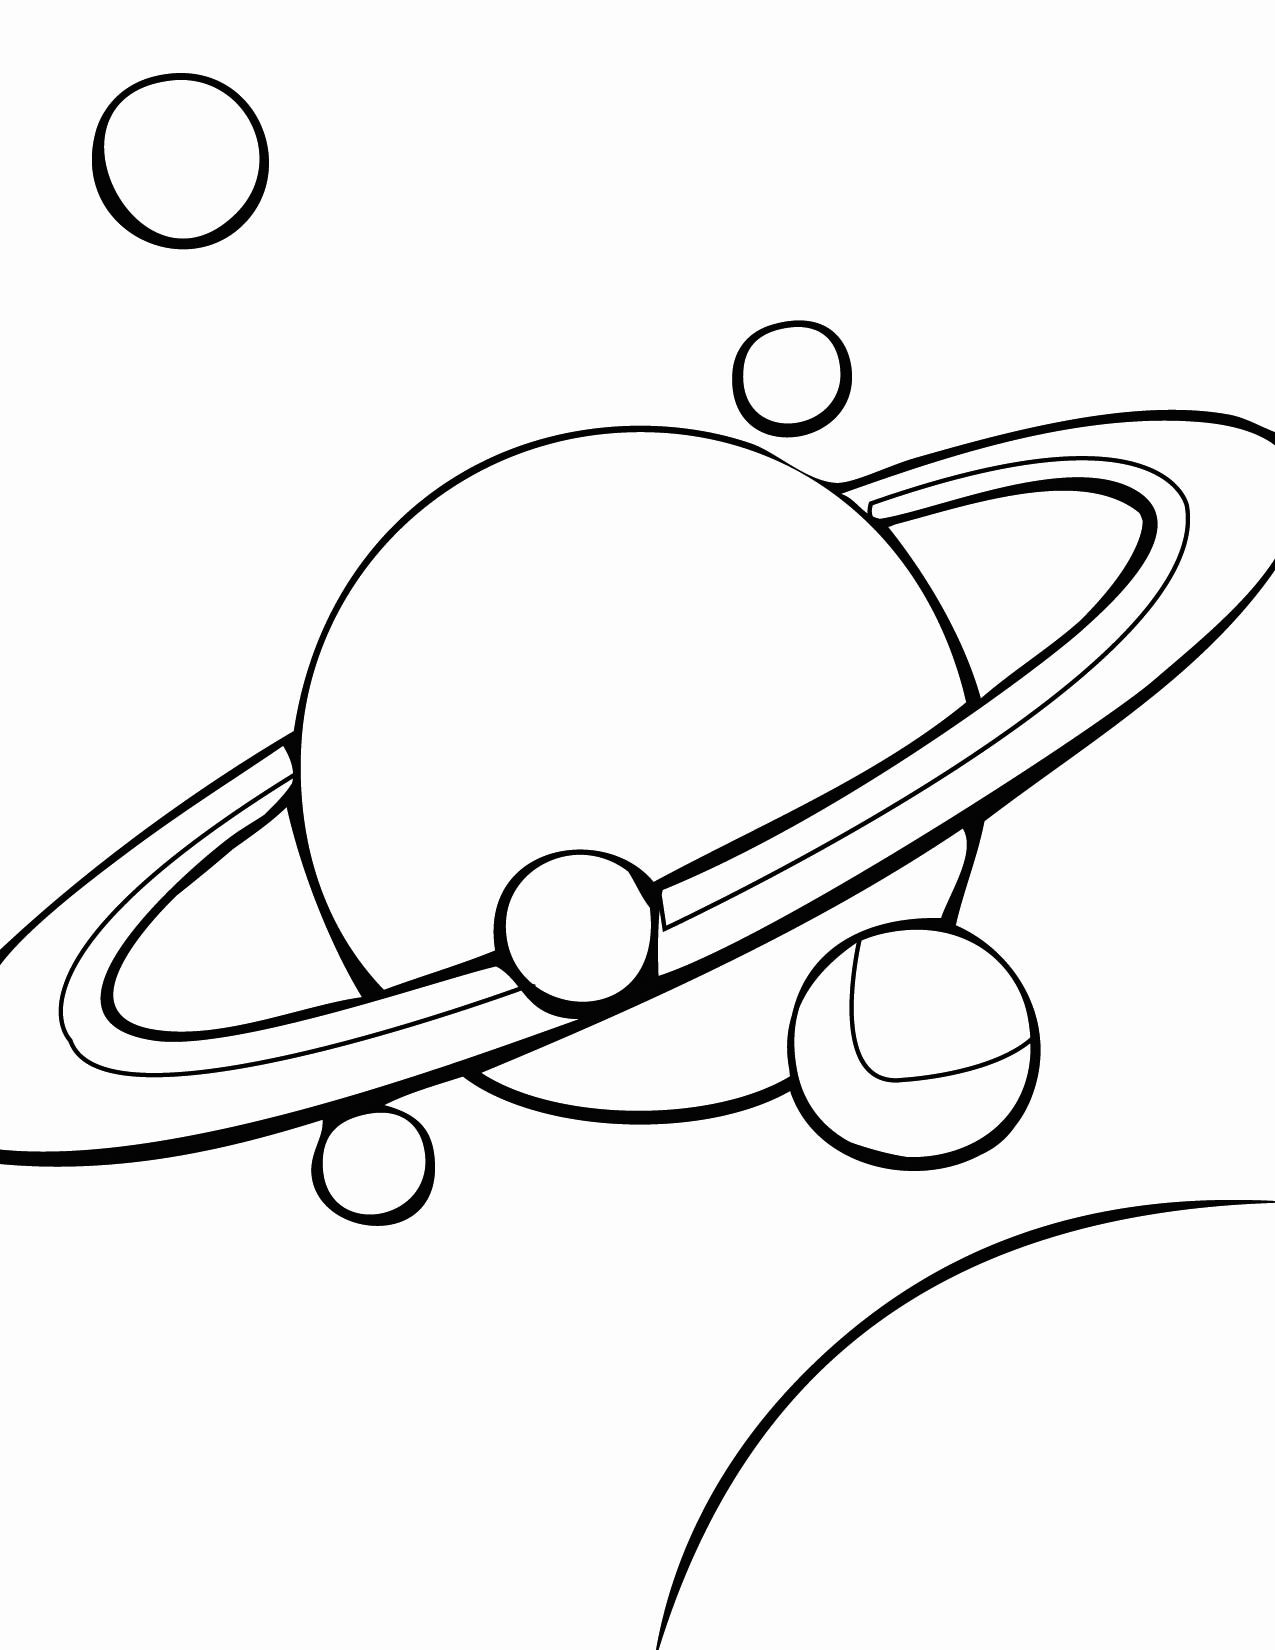 saturn-coloring-pages-best-coloring-pages-for-kids